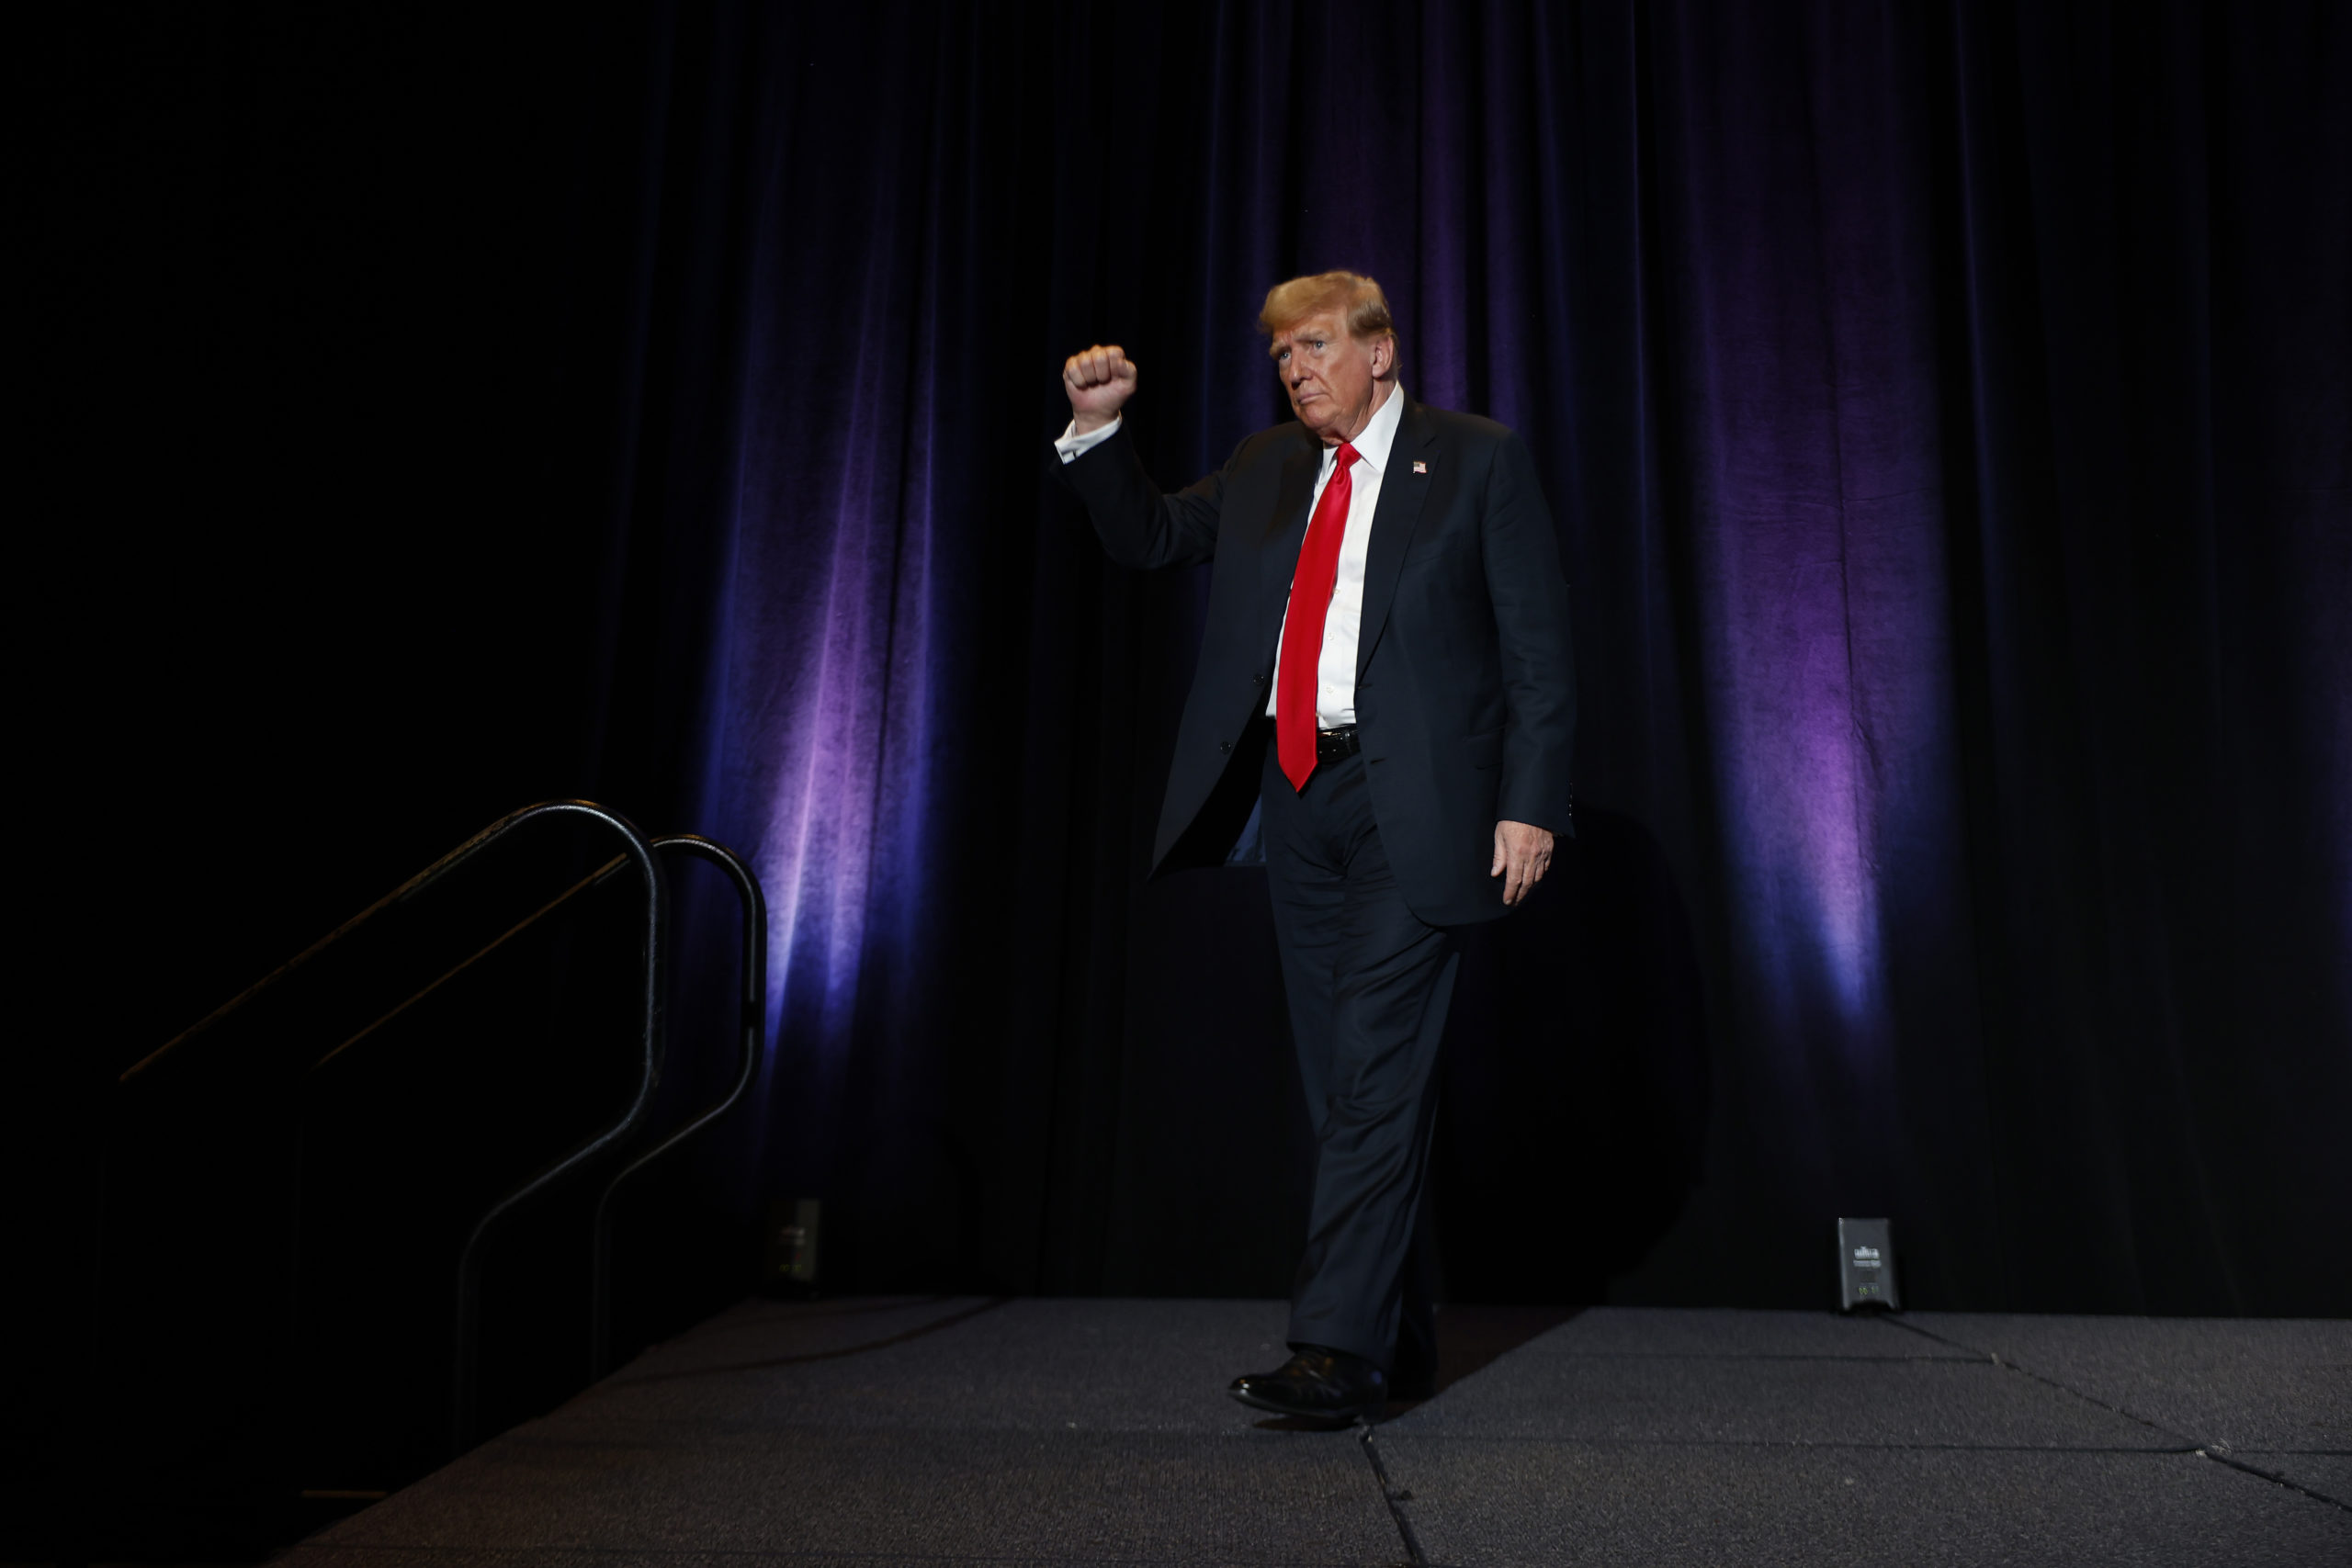 Former U.S. President and Republican presidential candidate Donald Trump steps off stage after addressing the Libertarian Party National Convention at the Washington Hilton. (Photo by Chip Somodevilla/Getty Images)